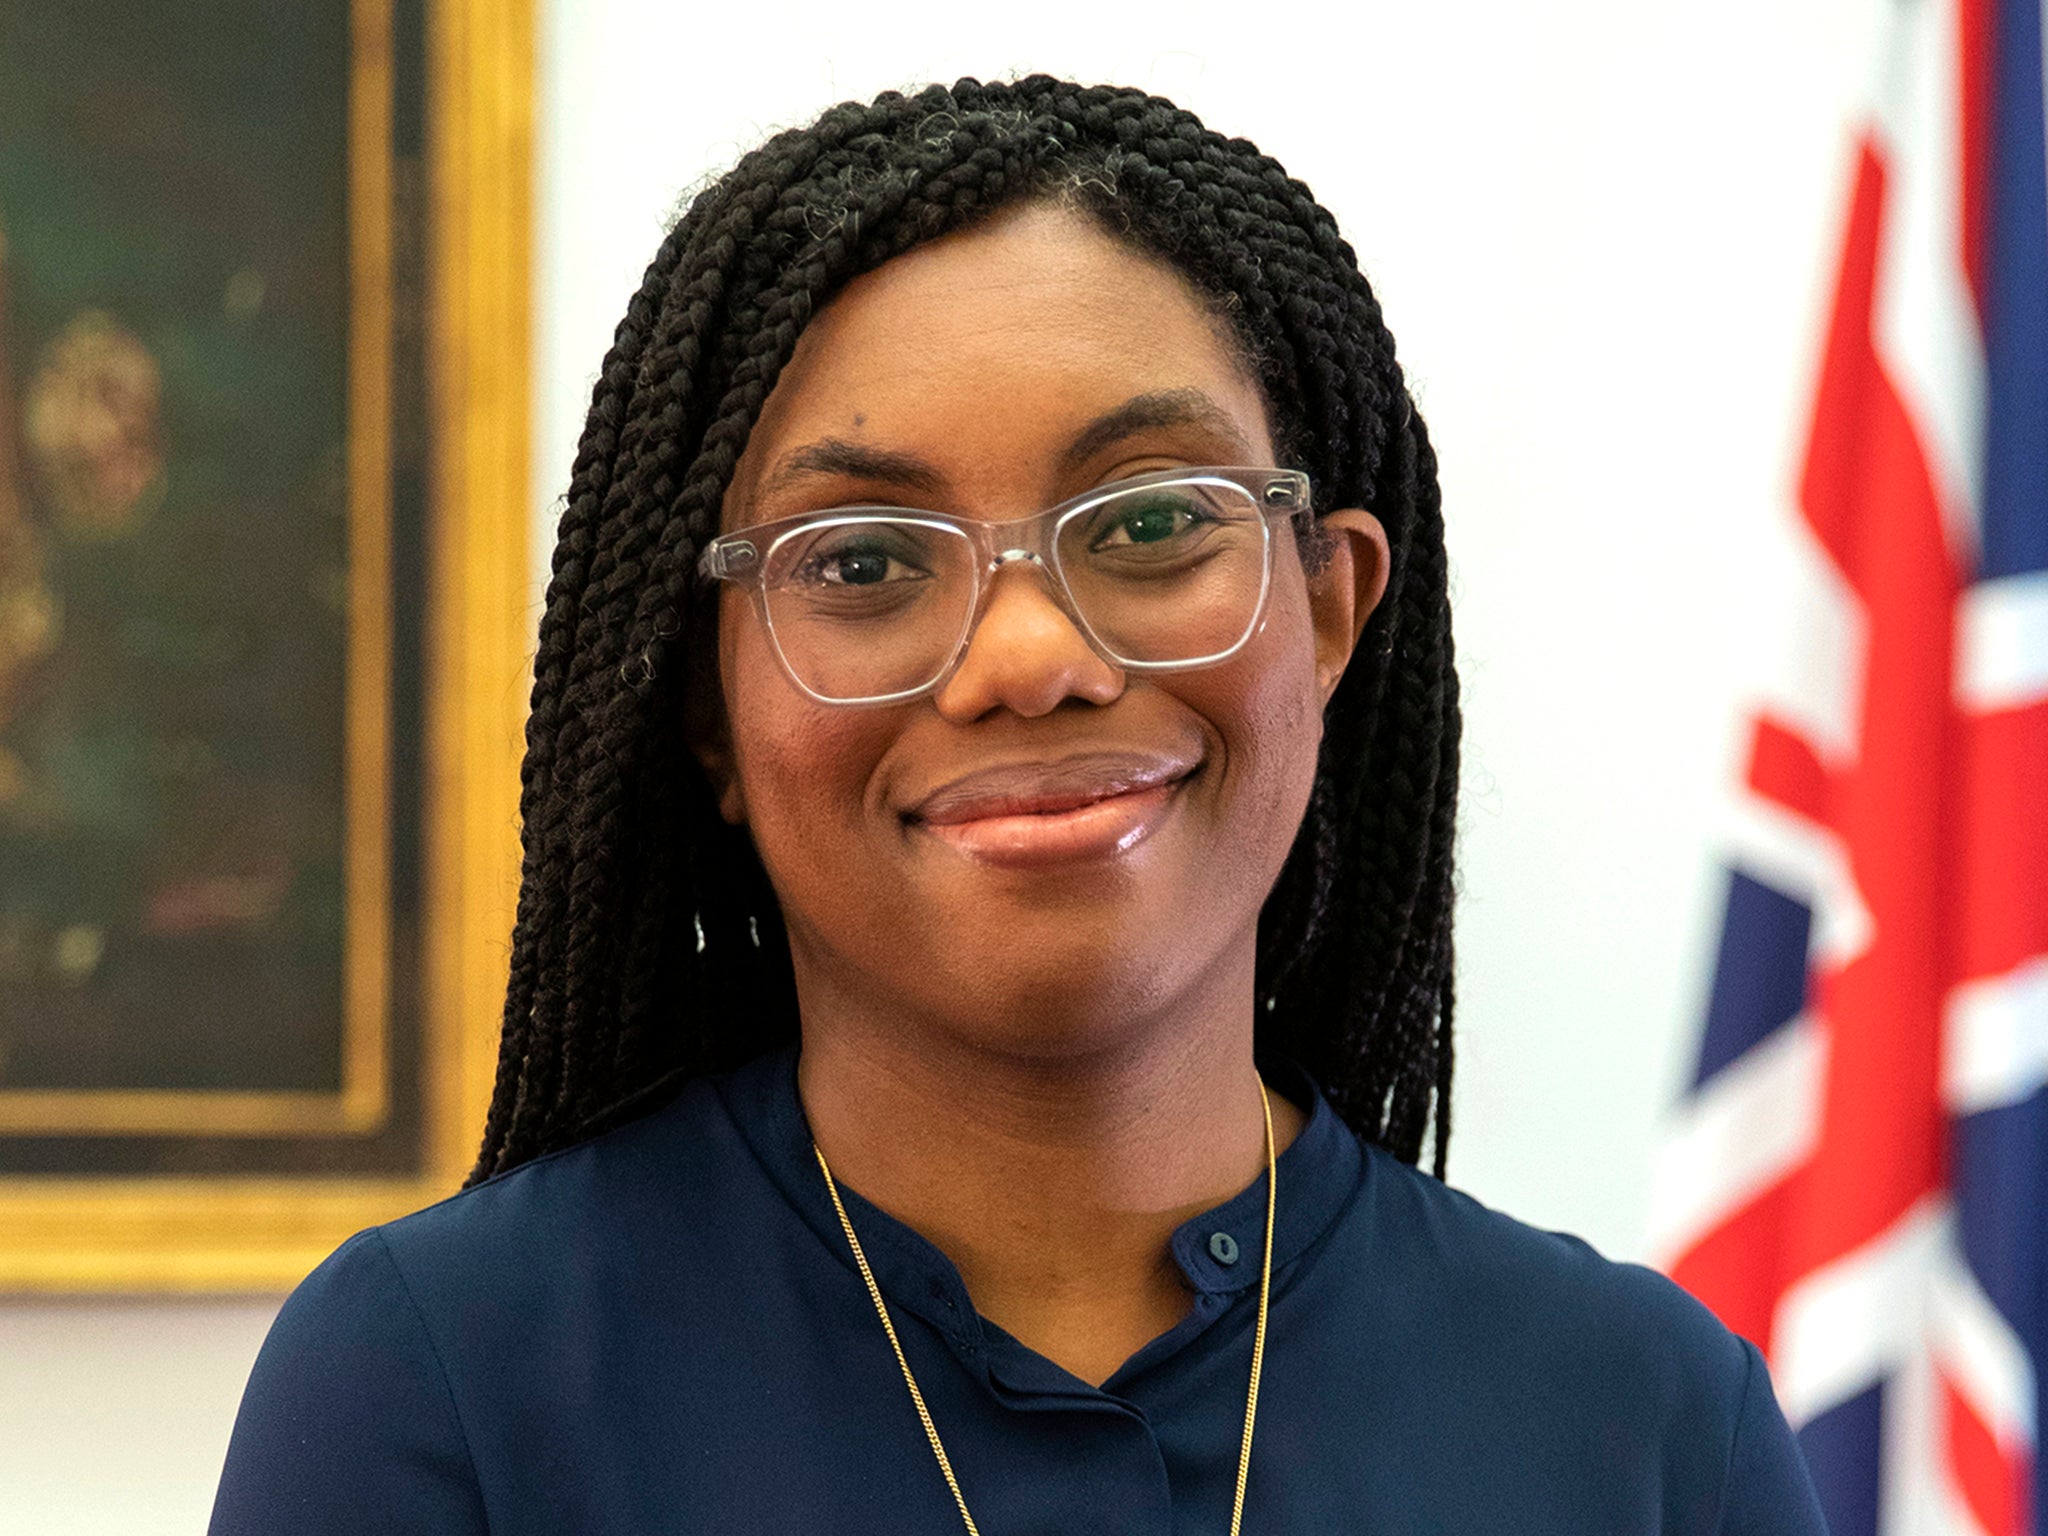 Kemi Badenoch was appointed as a Levelling Up minister in September